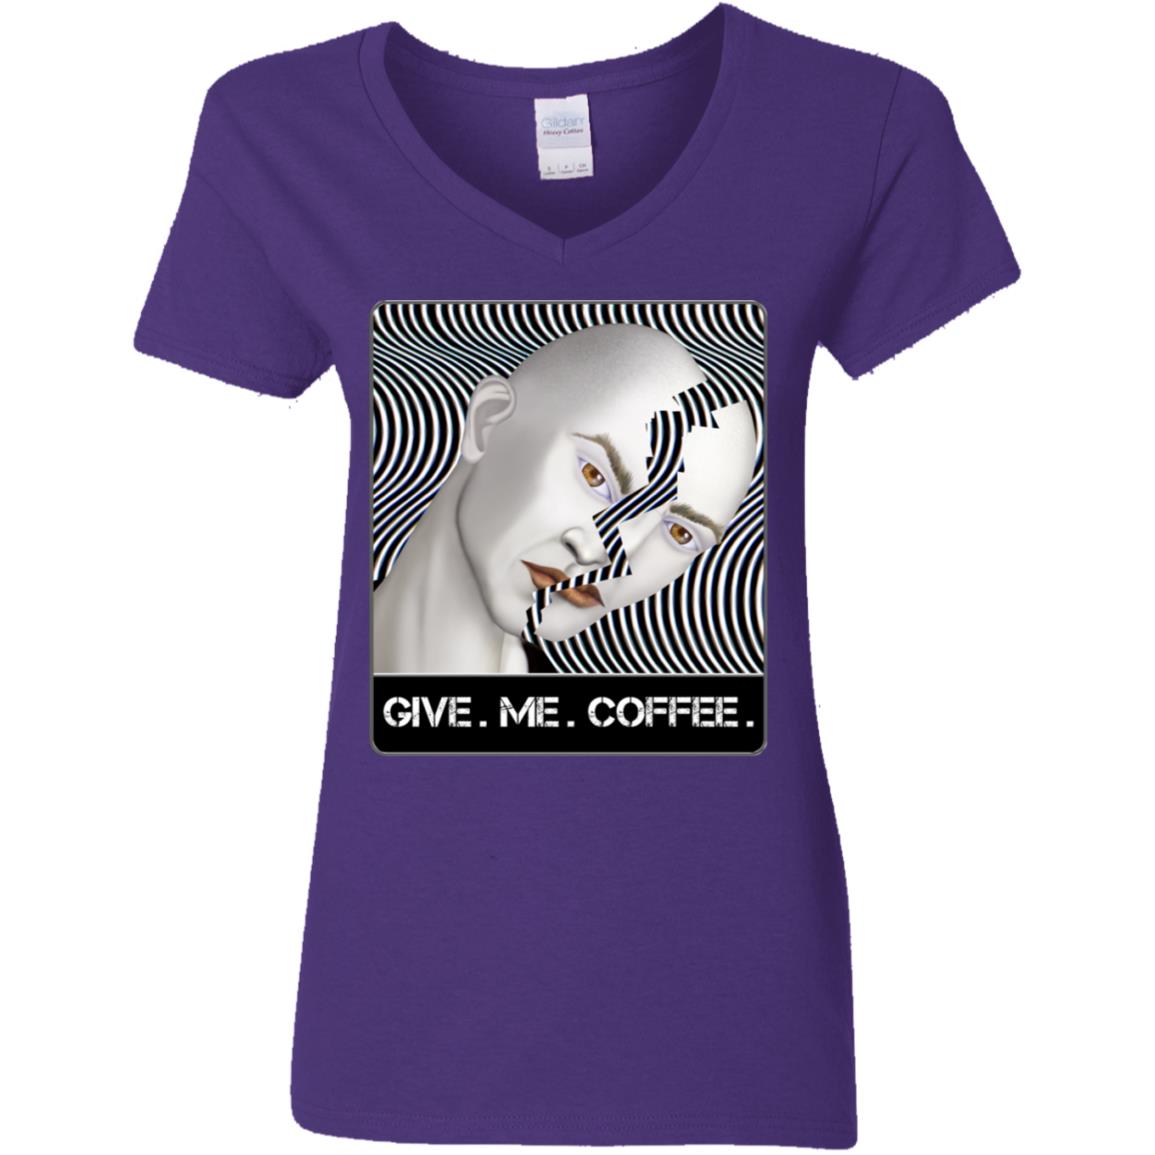 GIVE. ME. COFFEE. - Women's V-Neck T Shirt